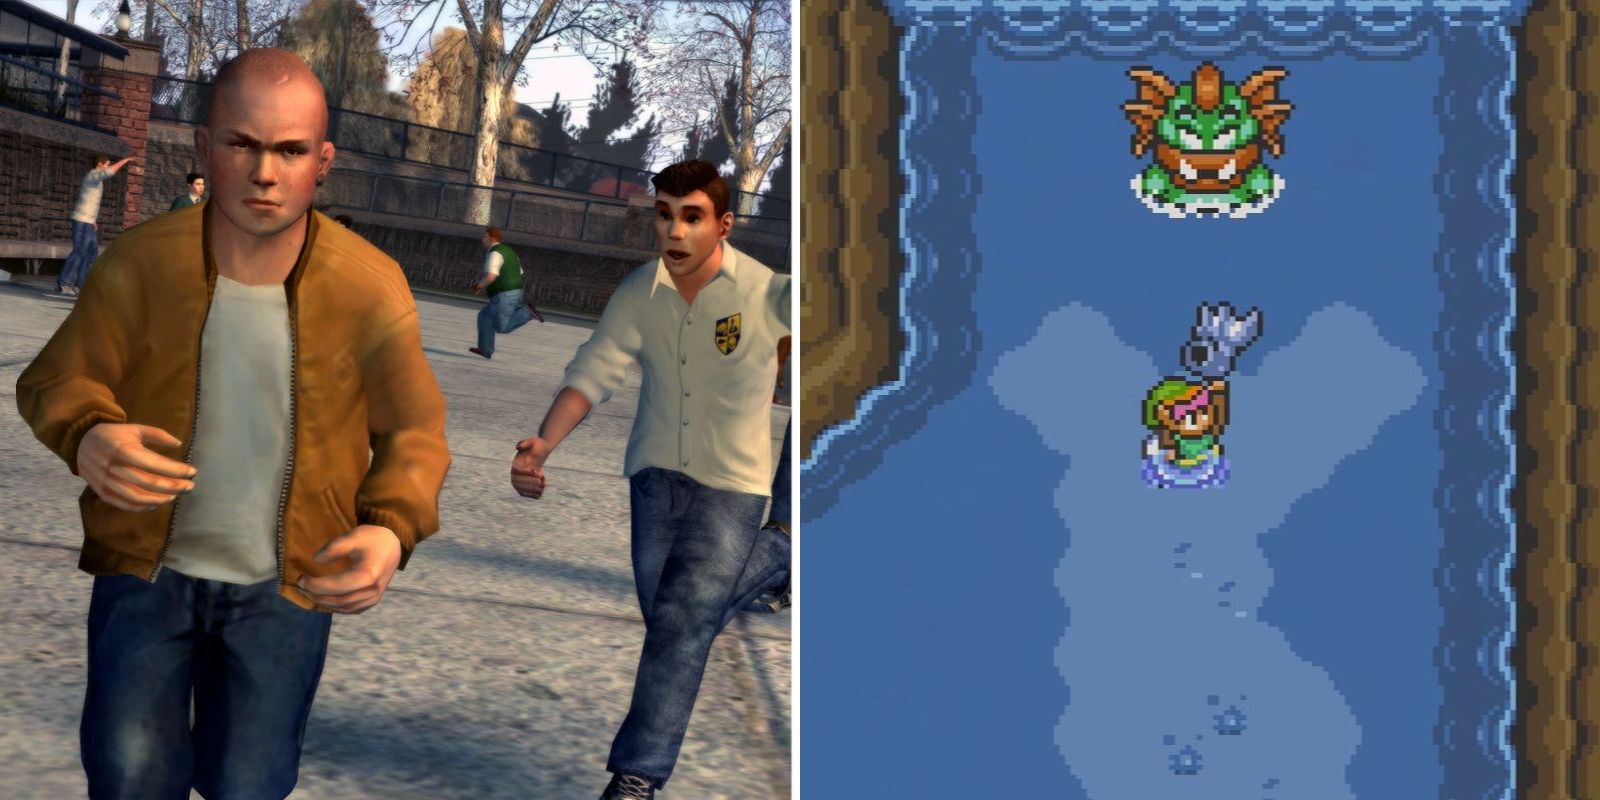 Jimmy Hopkins running from students, and Link receiving an item from a Zora